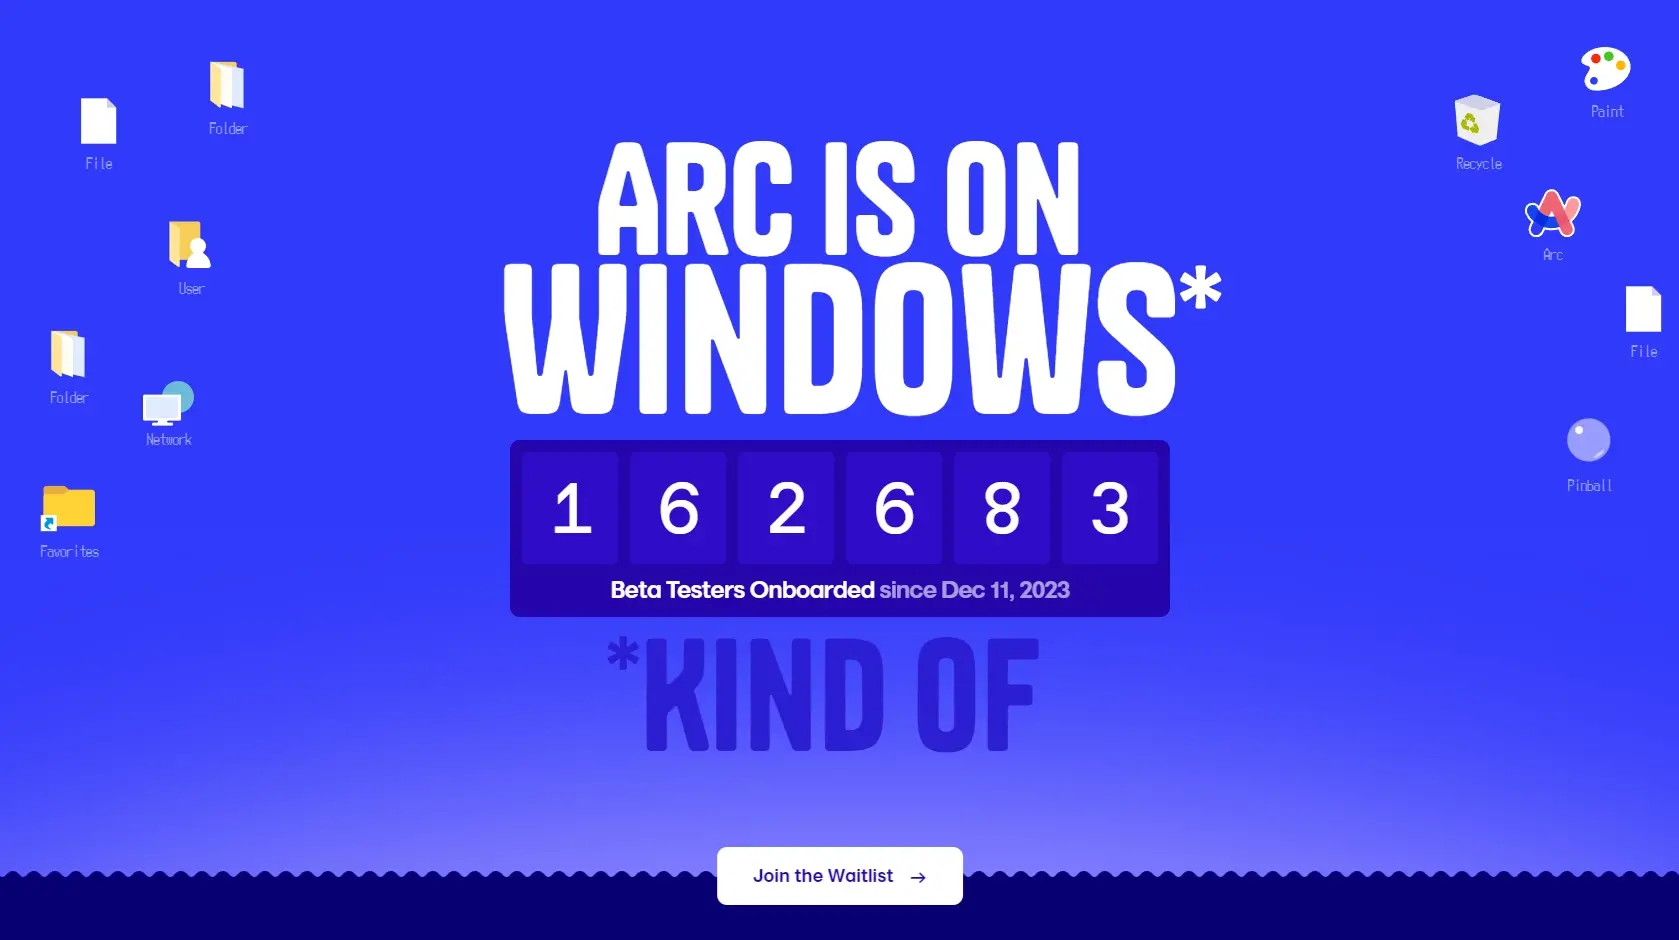 Arc for windows by the browser company